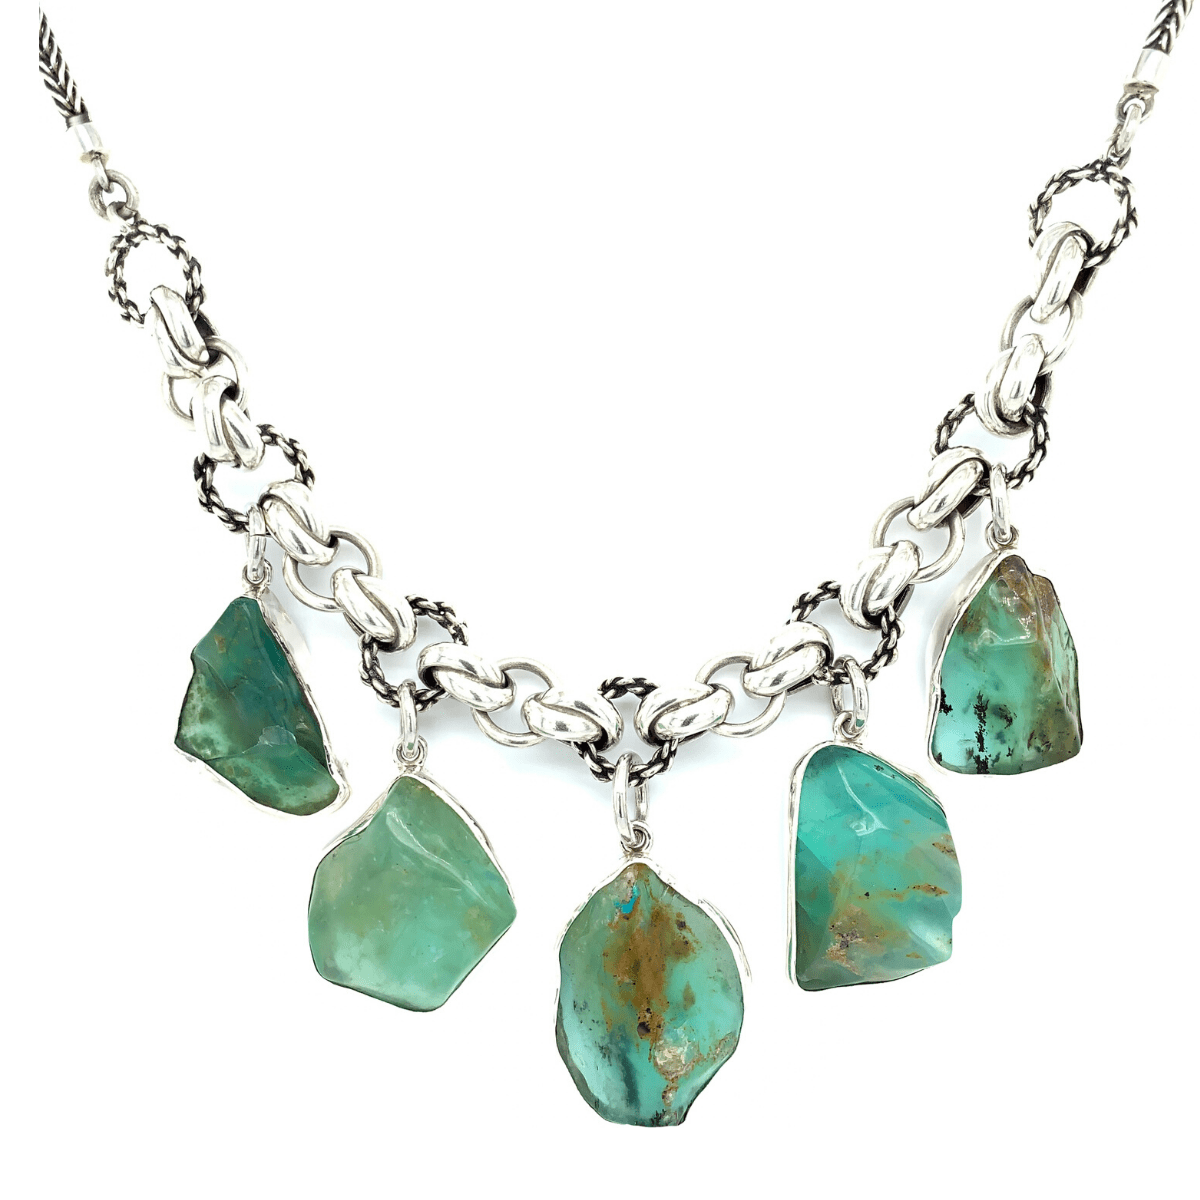 Rough Peruvian Blue Opals &amp; Sterling Silver Links Necklace - Qinti - The Peruvian Shop